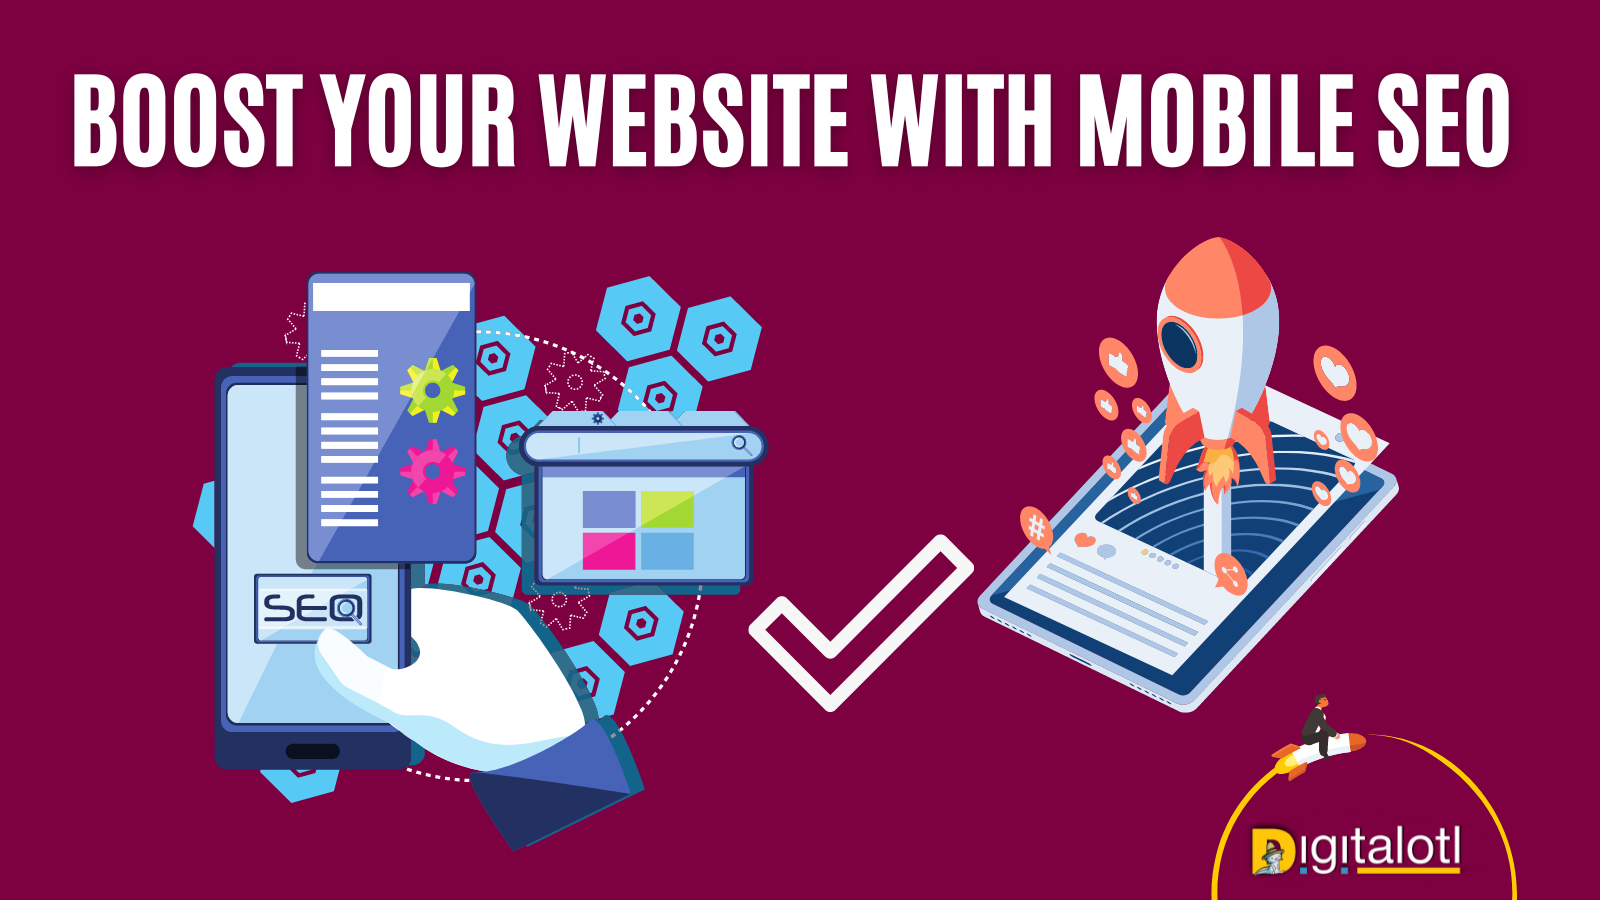 Boost Your website with Mobile SEO strategies